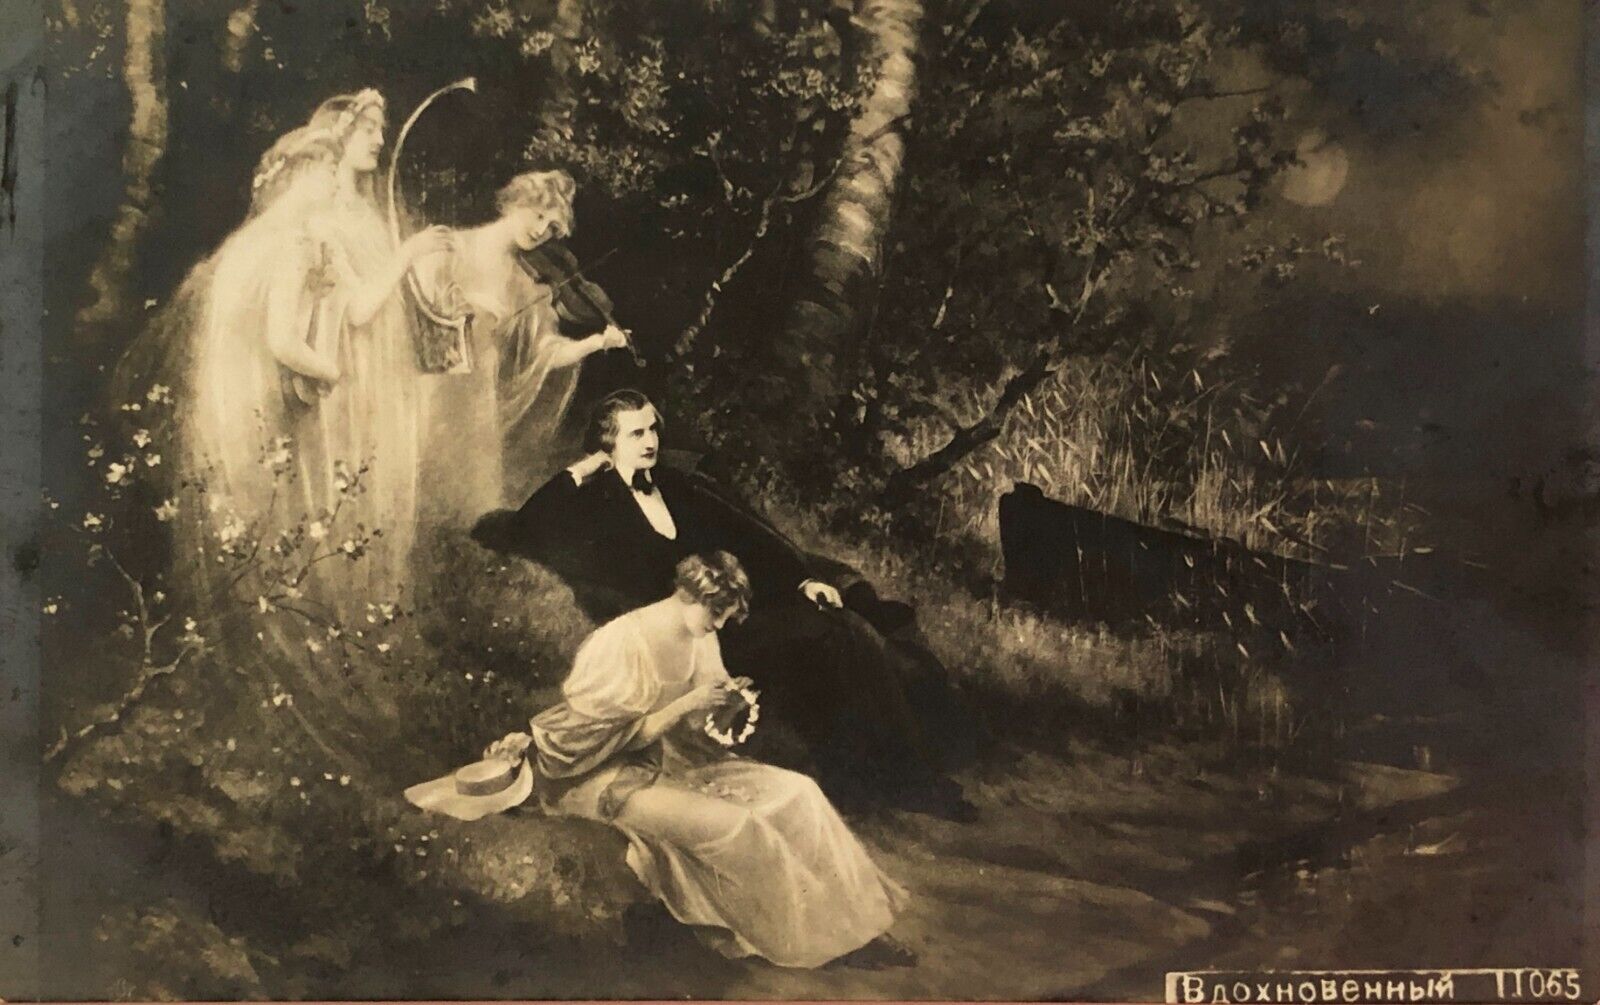 1900s Mystic card Ghosts of Inspiration B&W card ANTIQUE POSTCARD